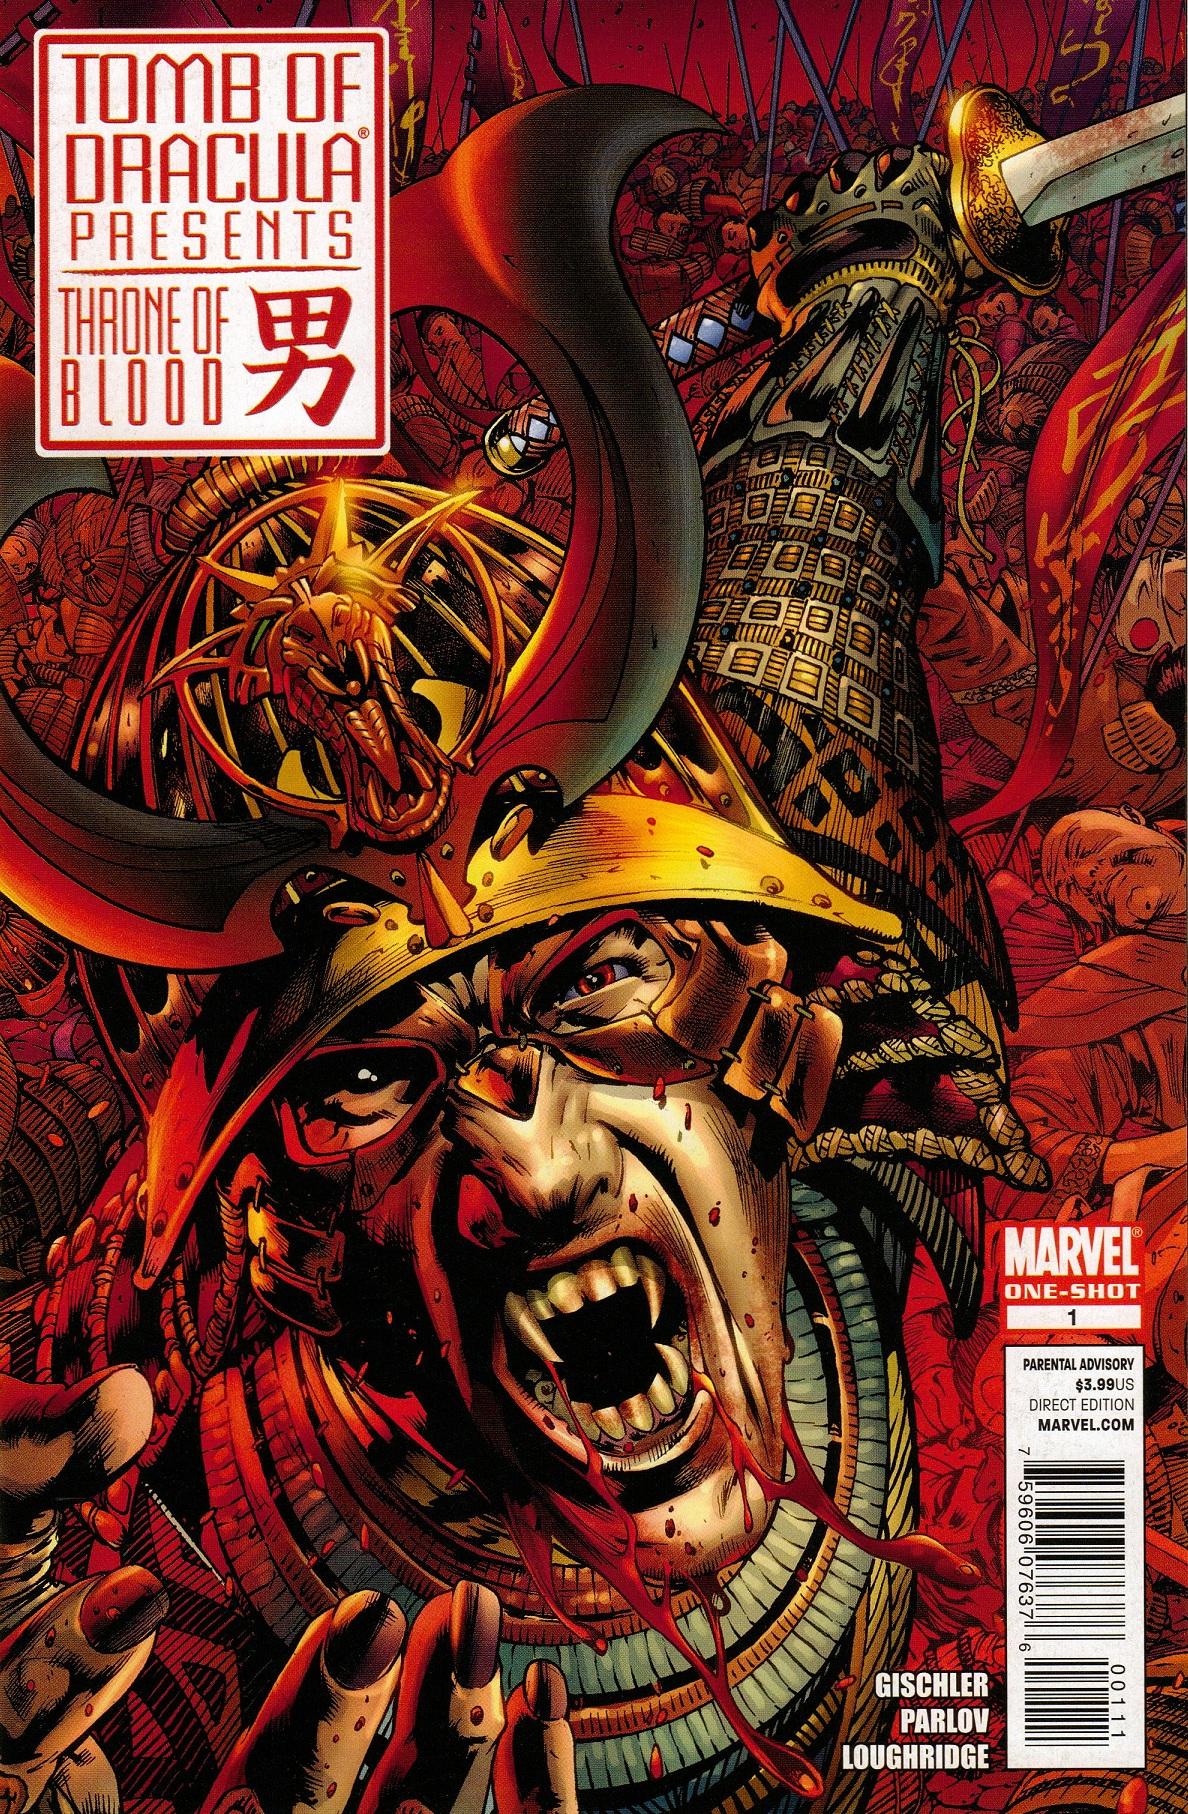 Tomb of Dracula Presents: Throne of Blood Vol. 1 #1